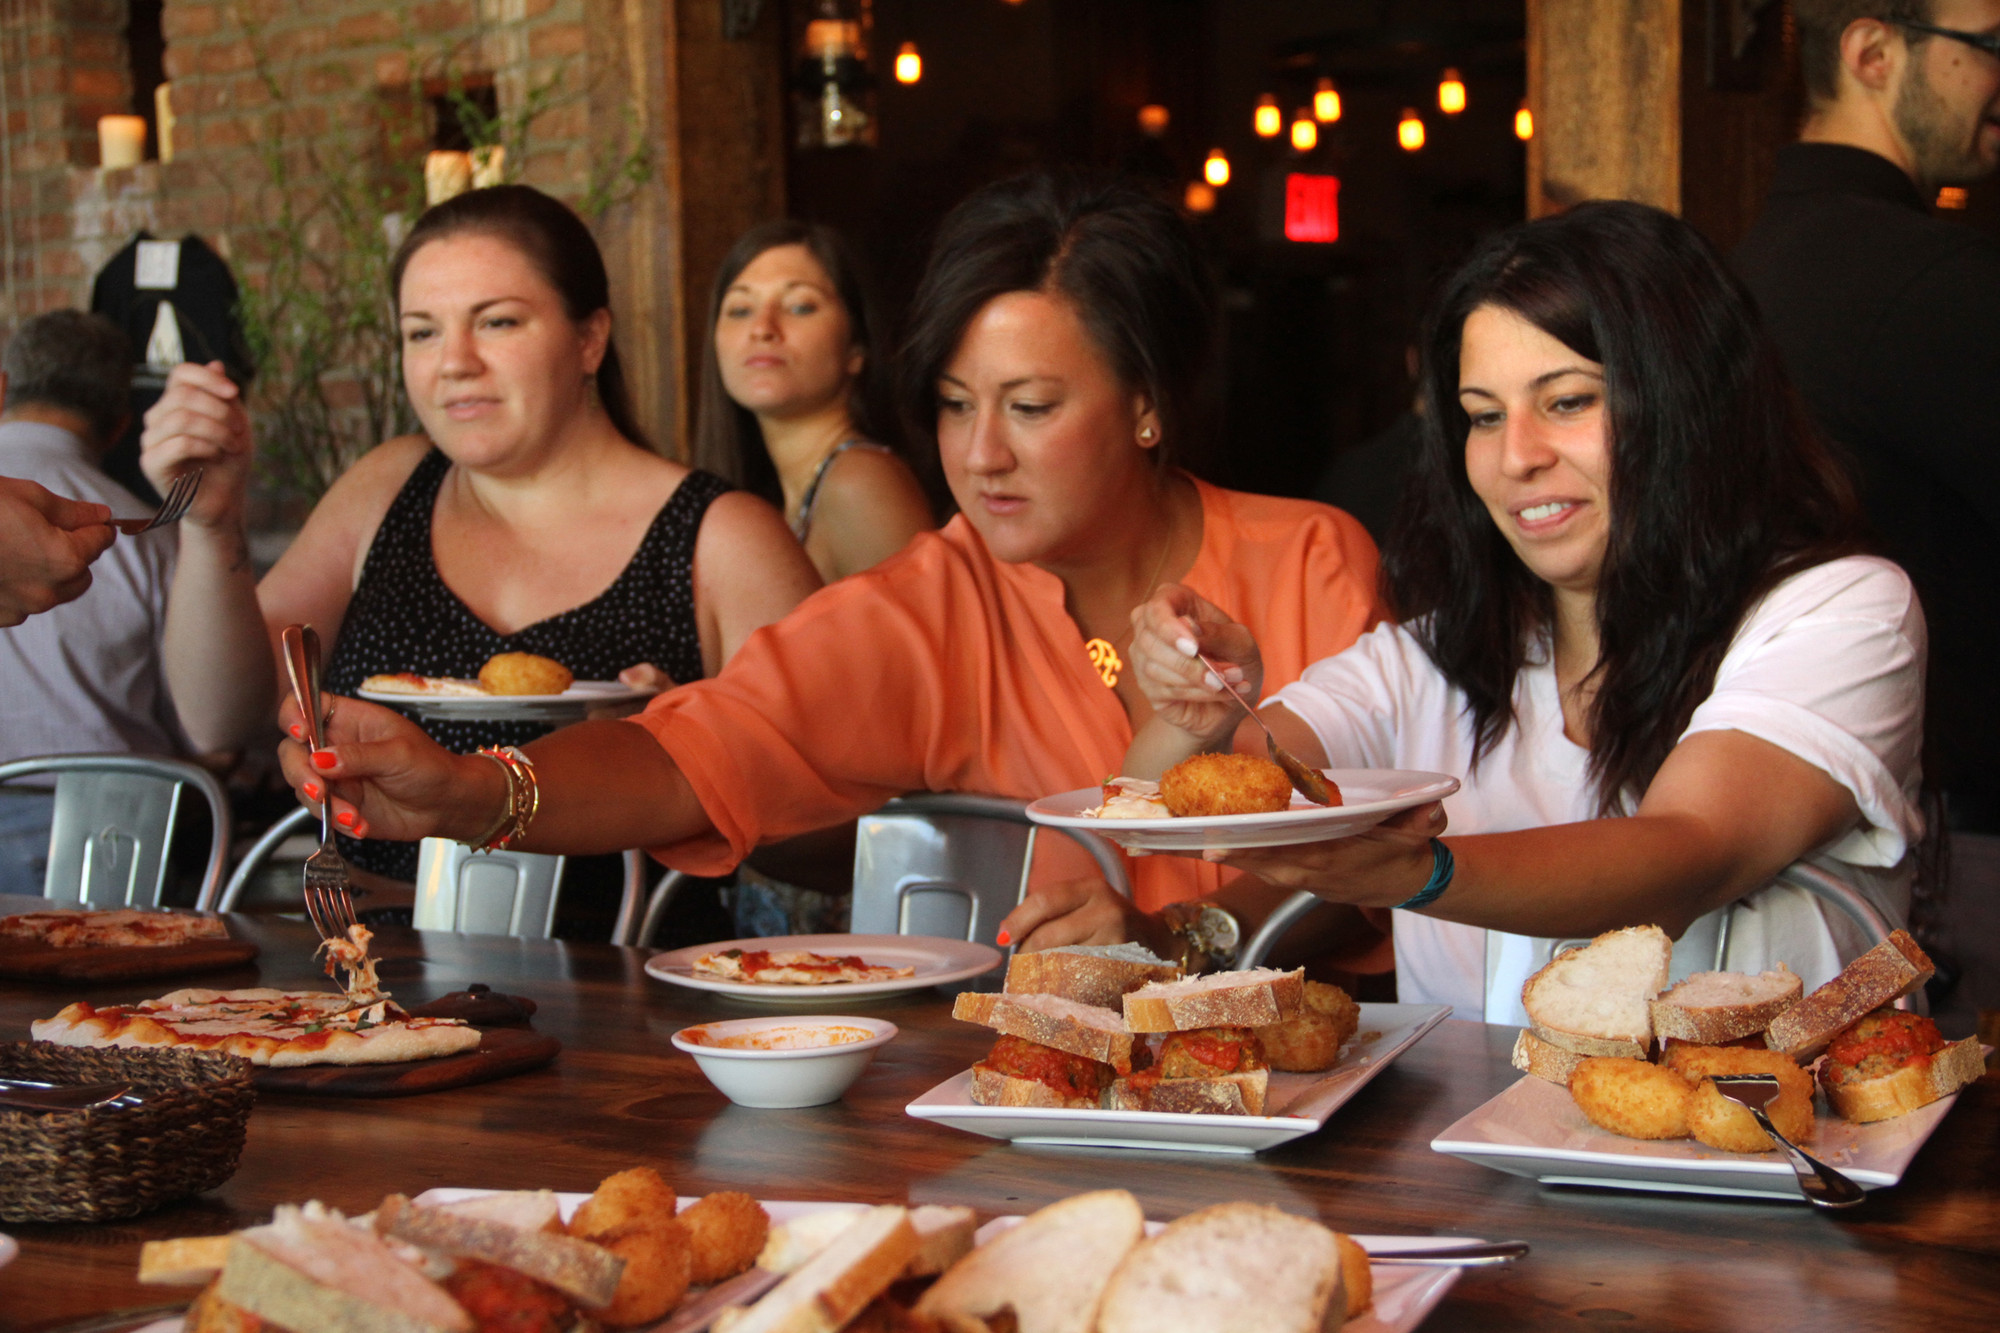 Kristen Melega, Christine Comer and Taline Kharhatoorian help themselves to appetizers.